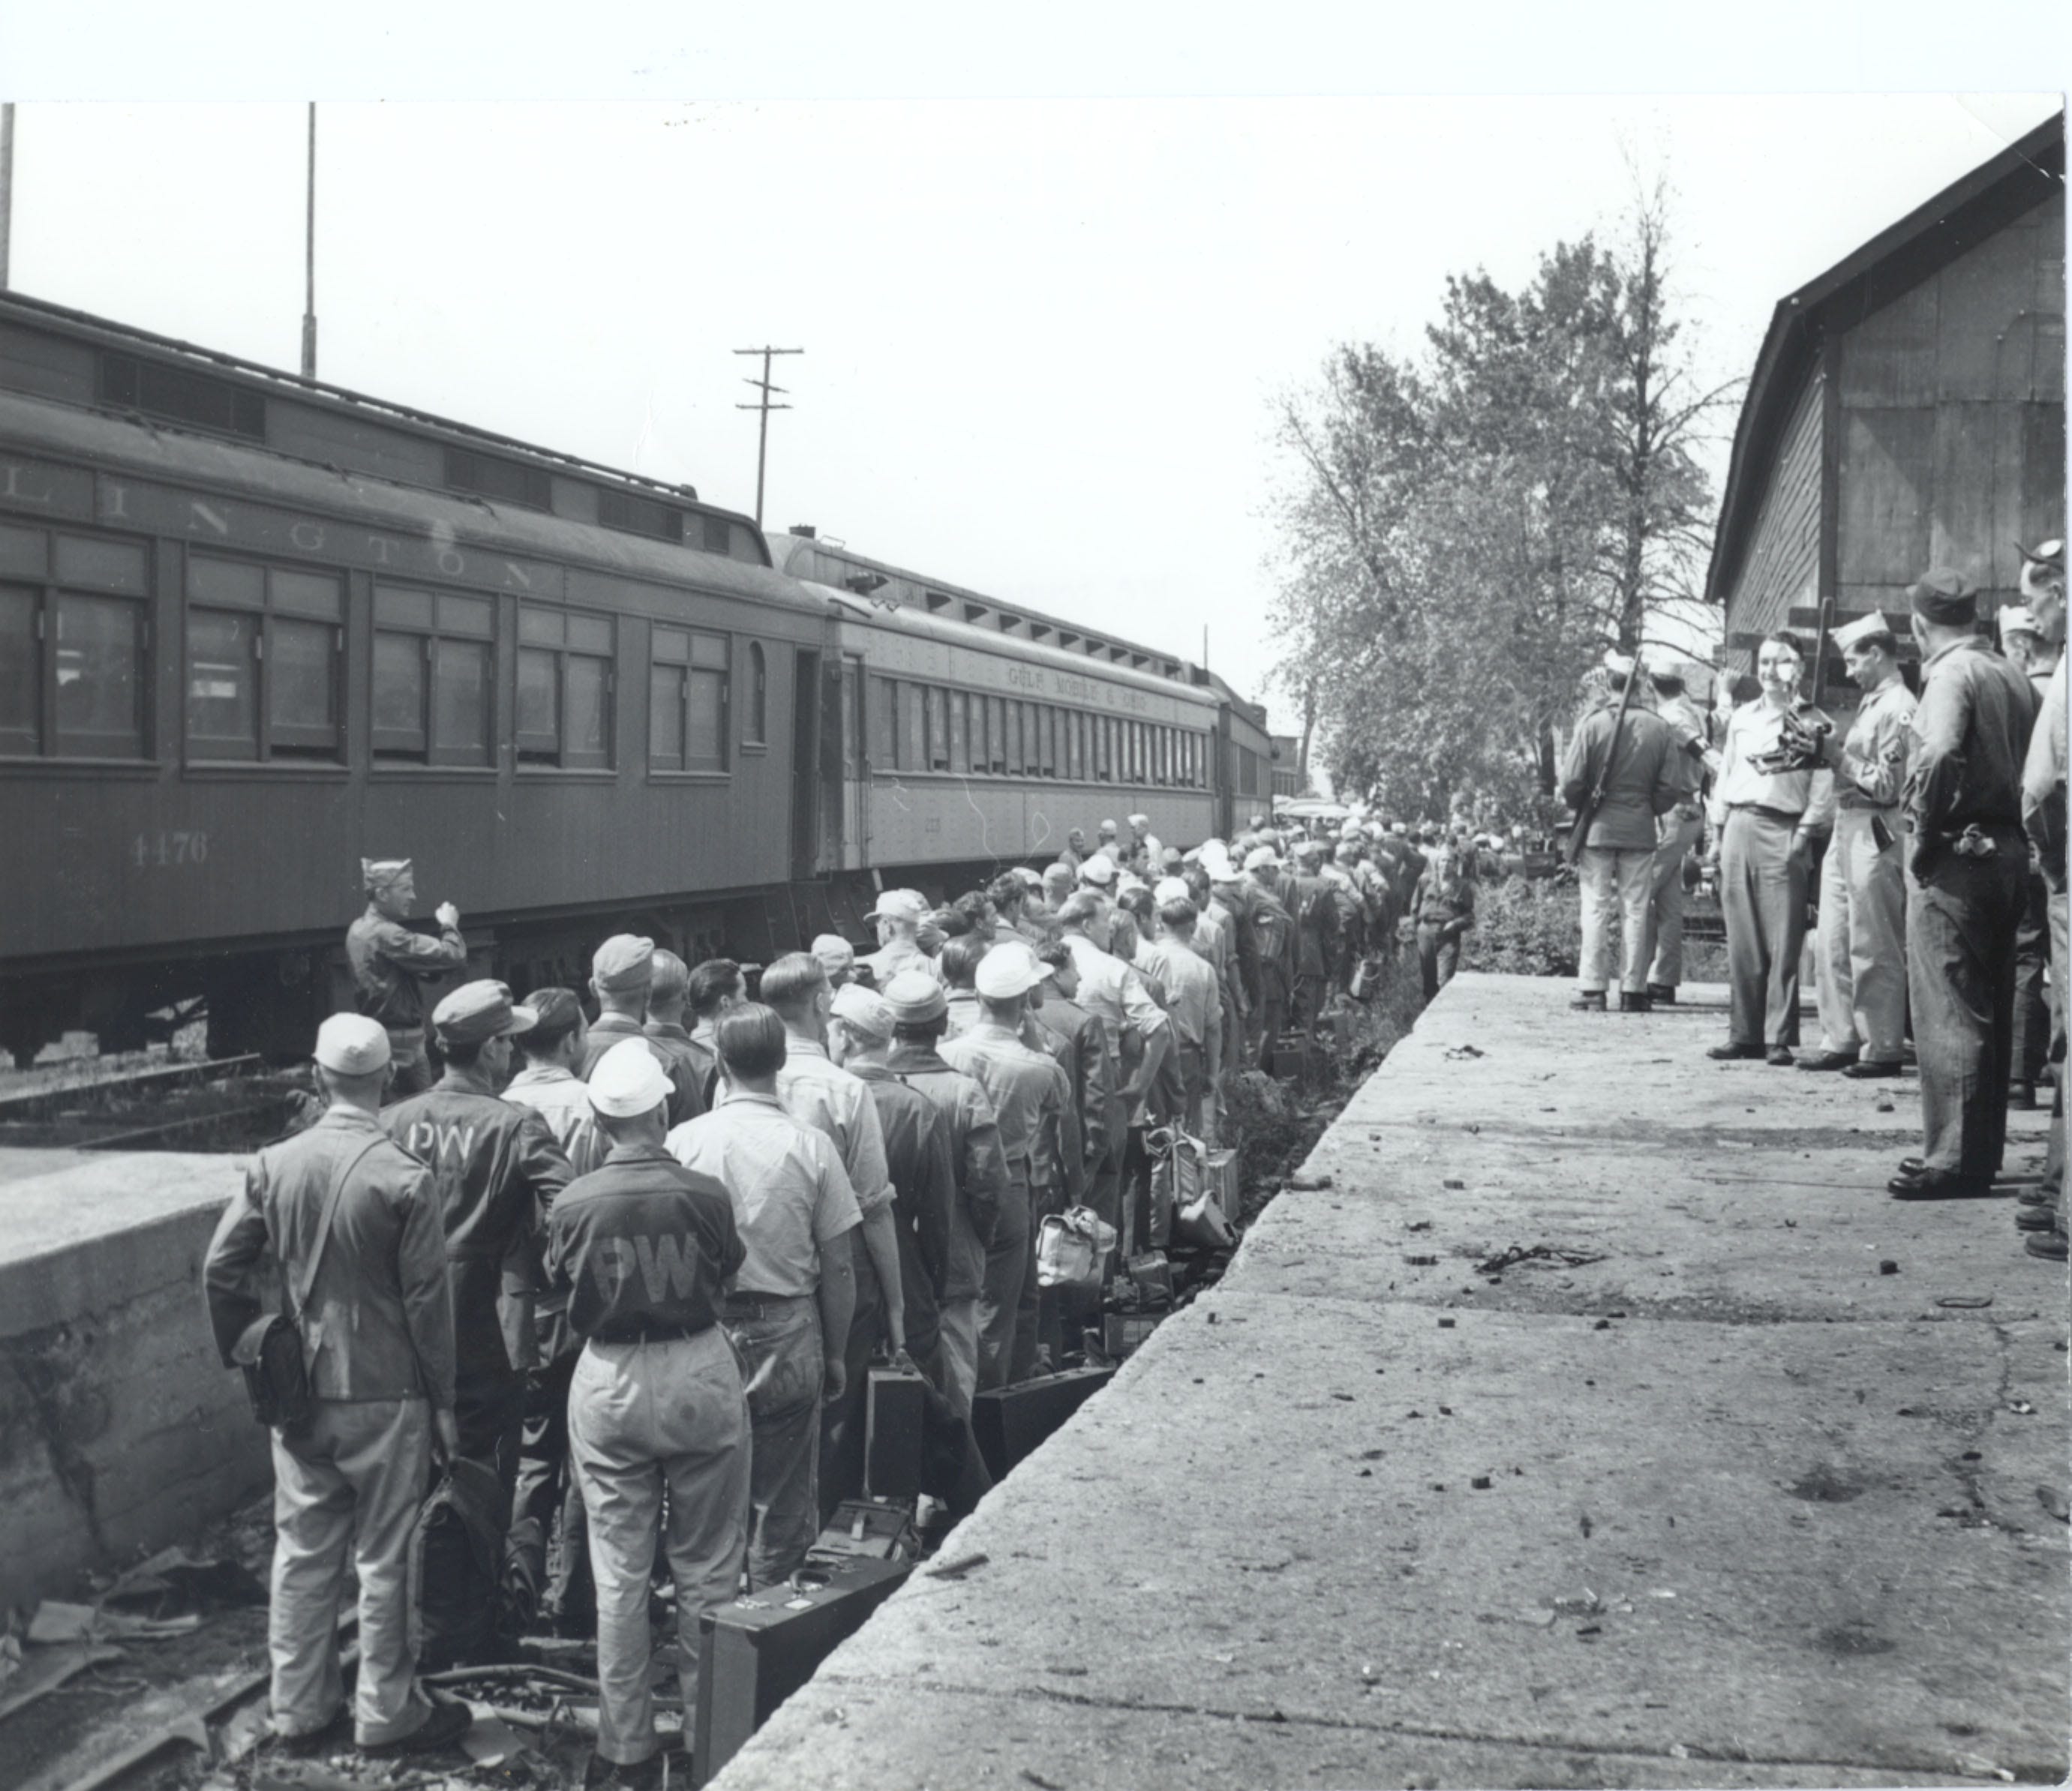 German POWs lined up at a train station in Door County to depart to World War II detention camps. The POWs worked in orchards and canning factories to help supply food to the U.S. during the war years.